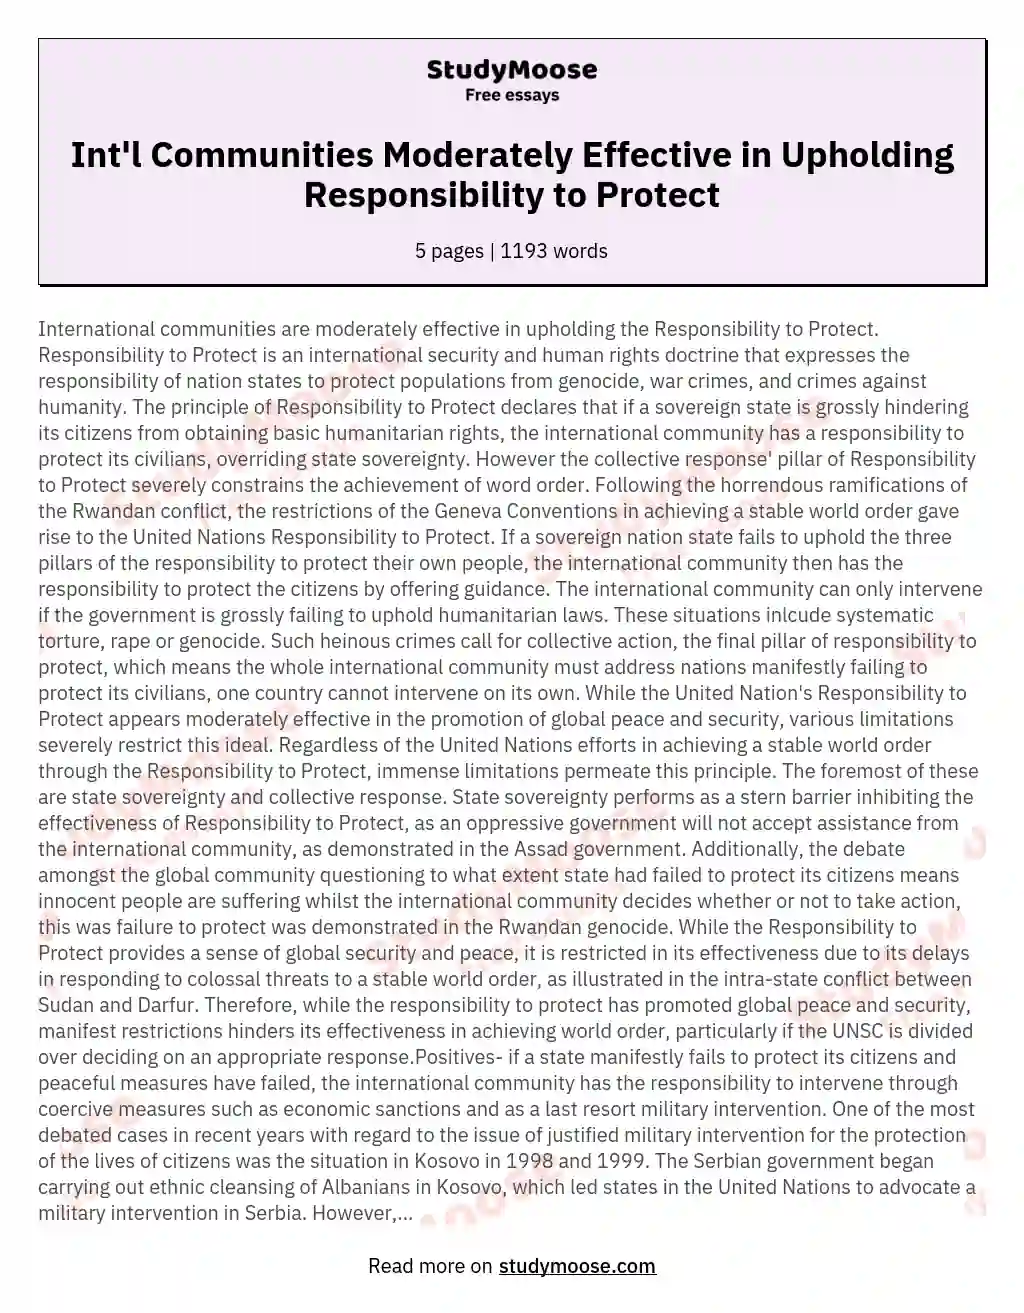 Int'l Communities Moderately Effective in Upholding Responsibility to Protect essay